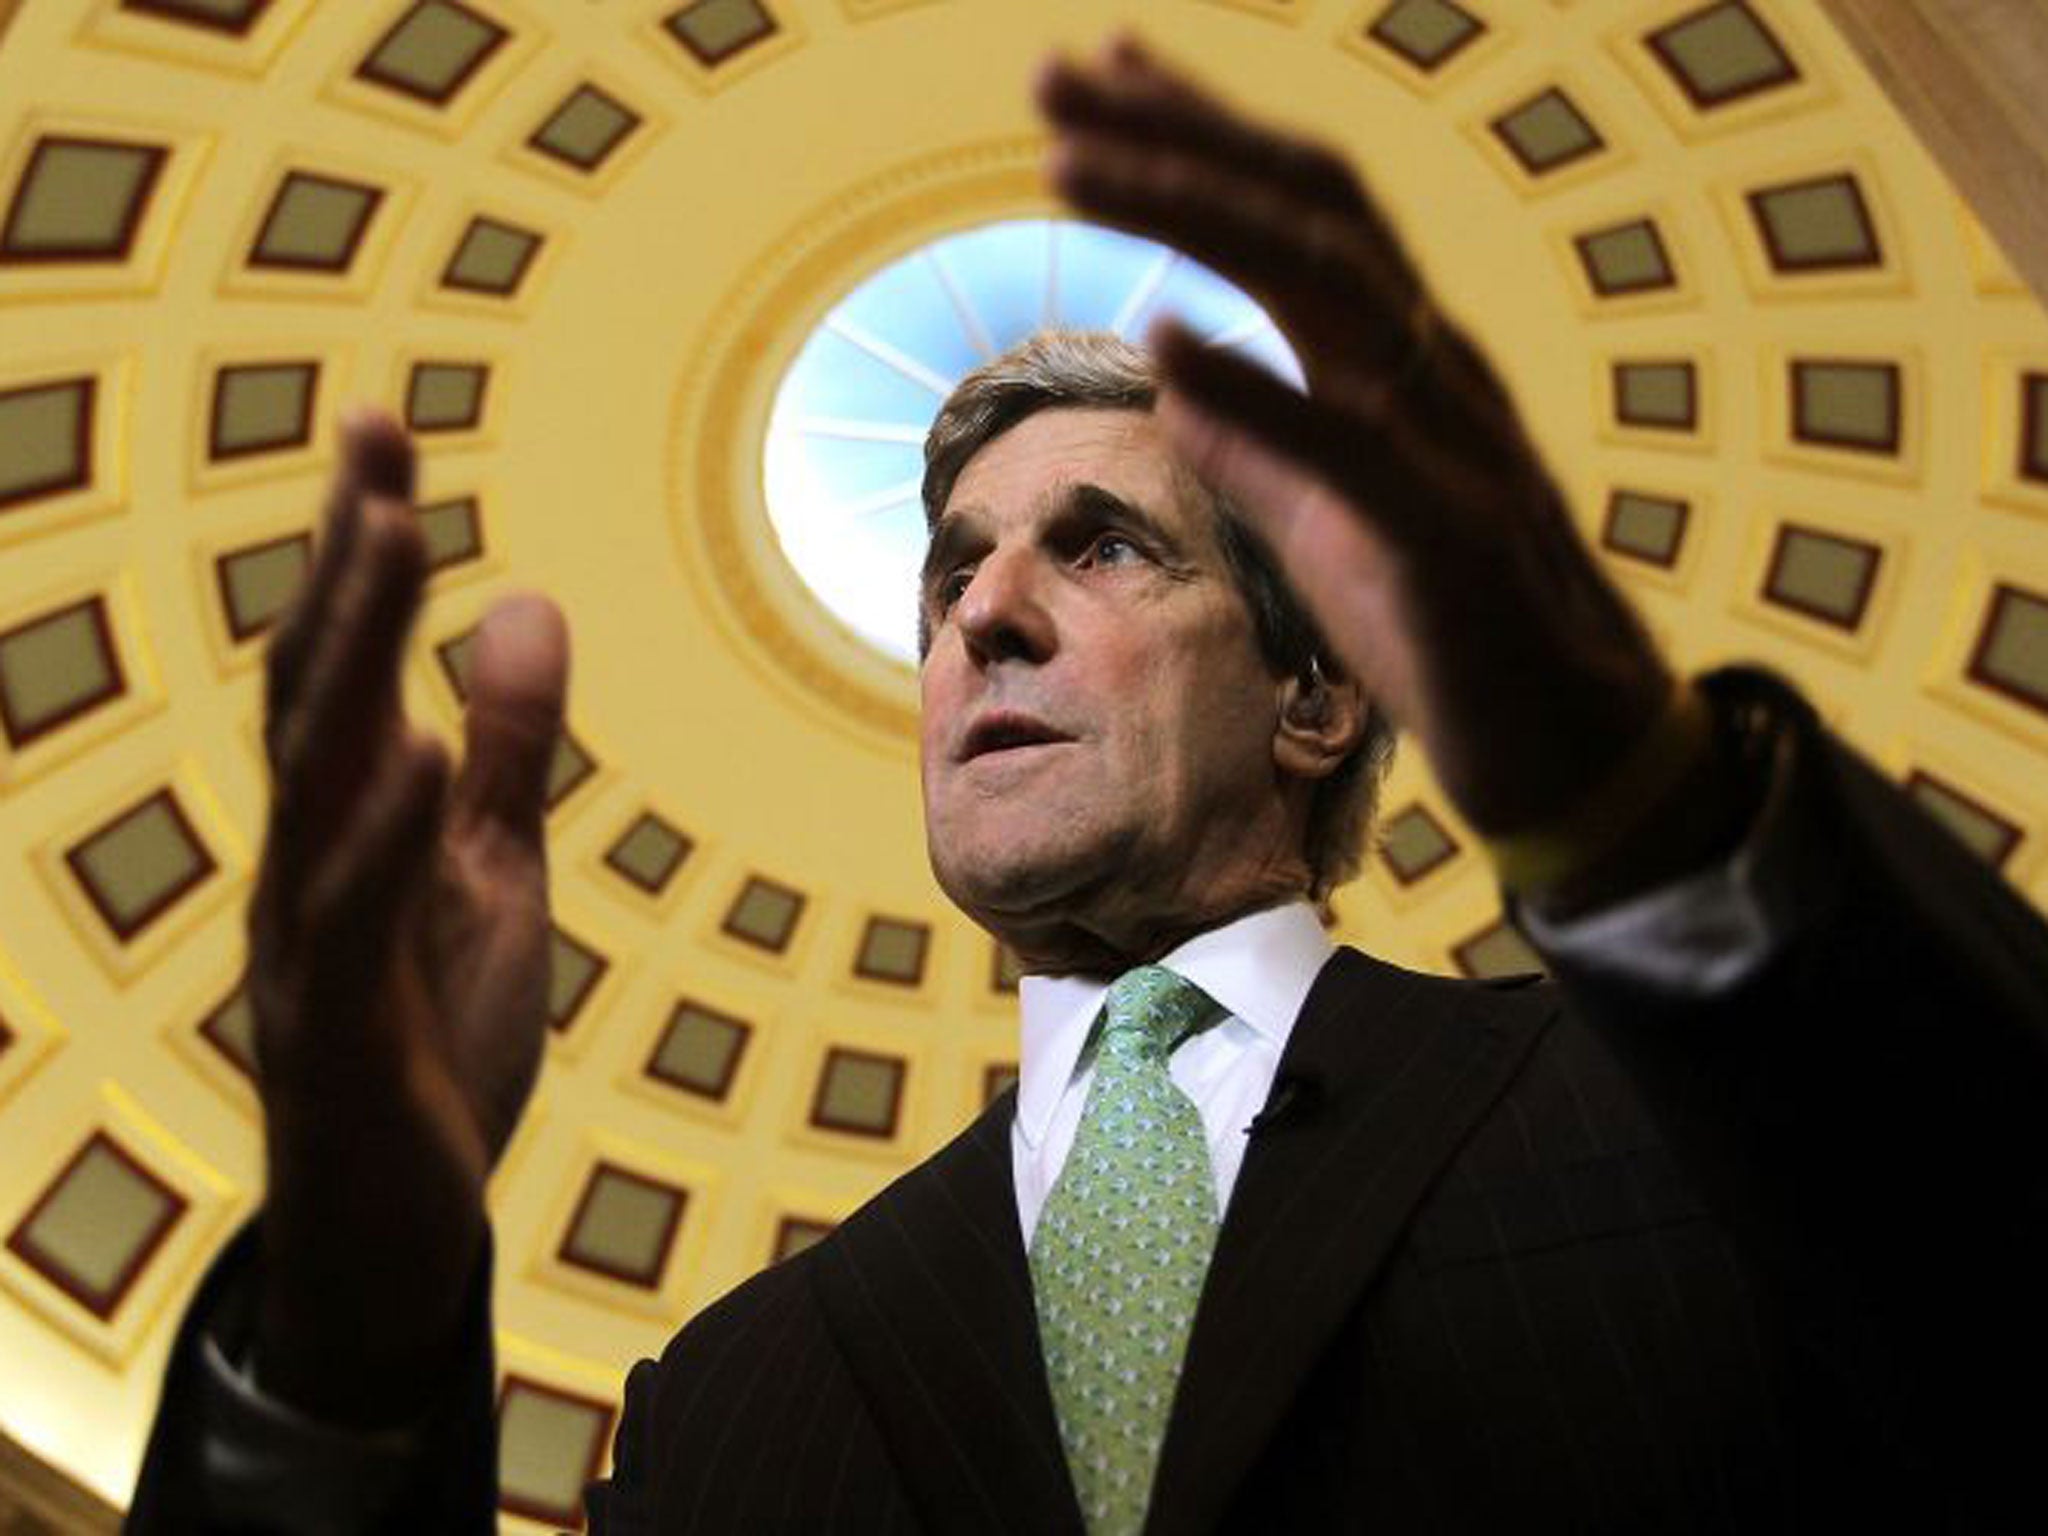 John Kerry is the uncontroversial choice for the post